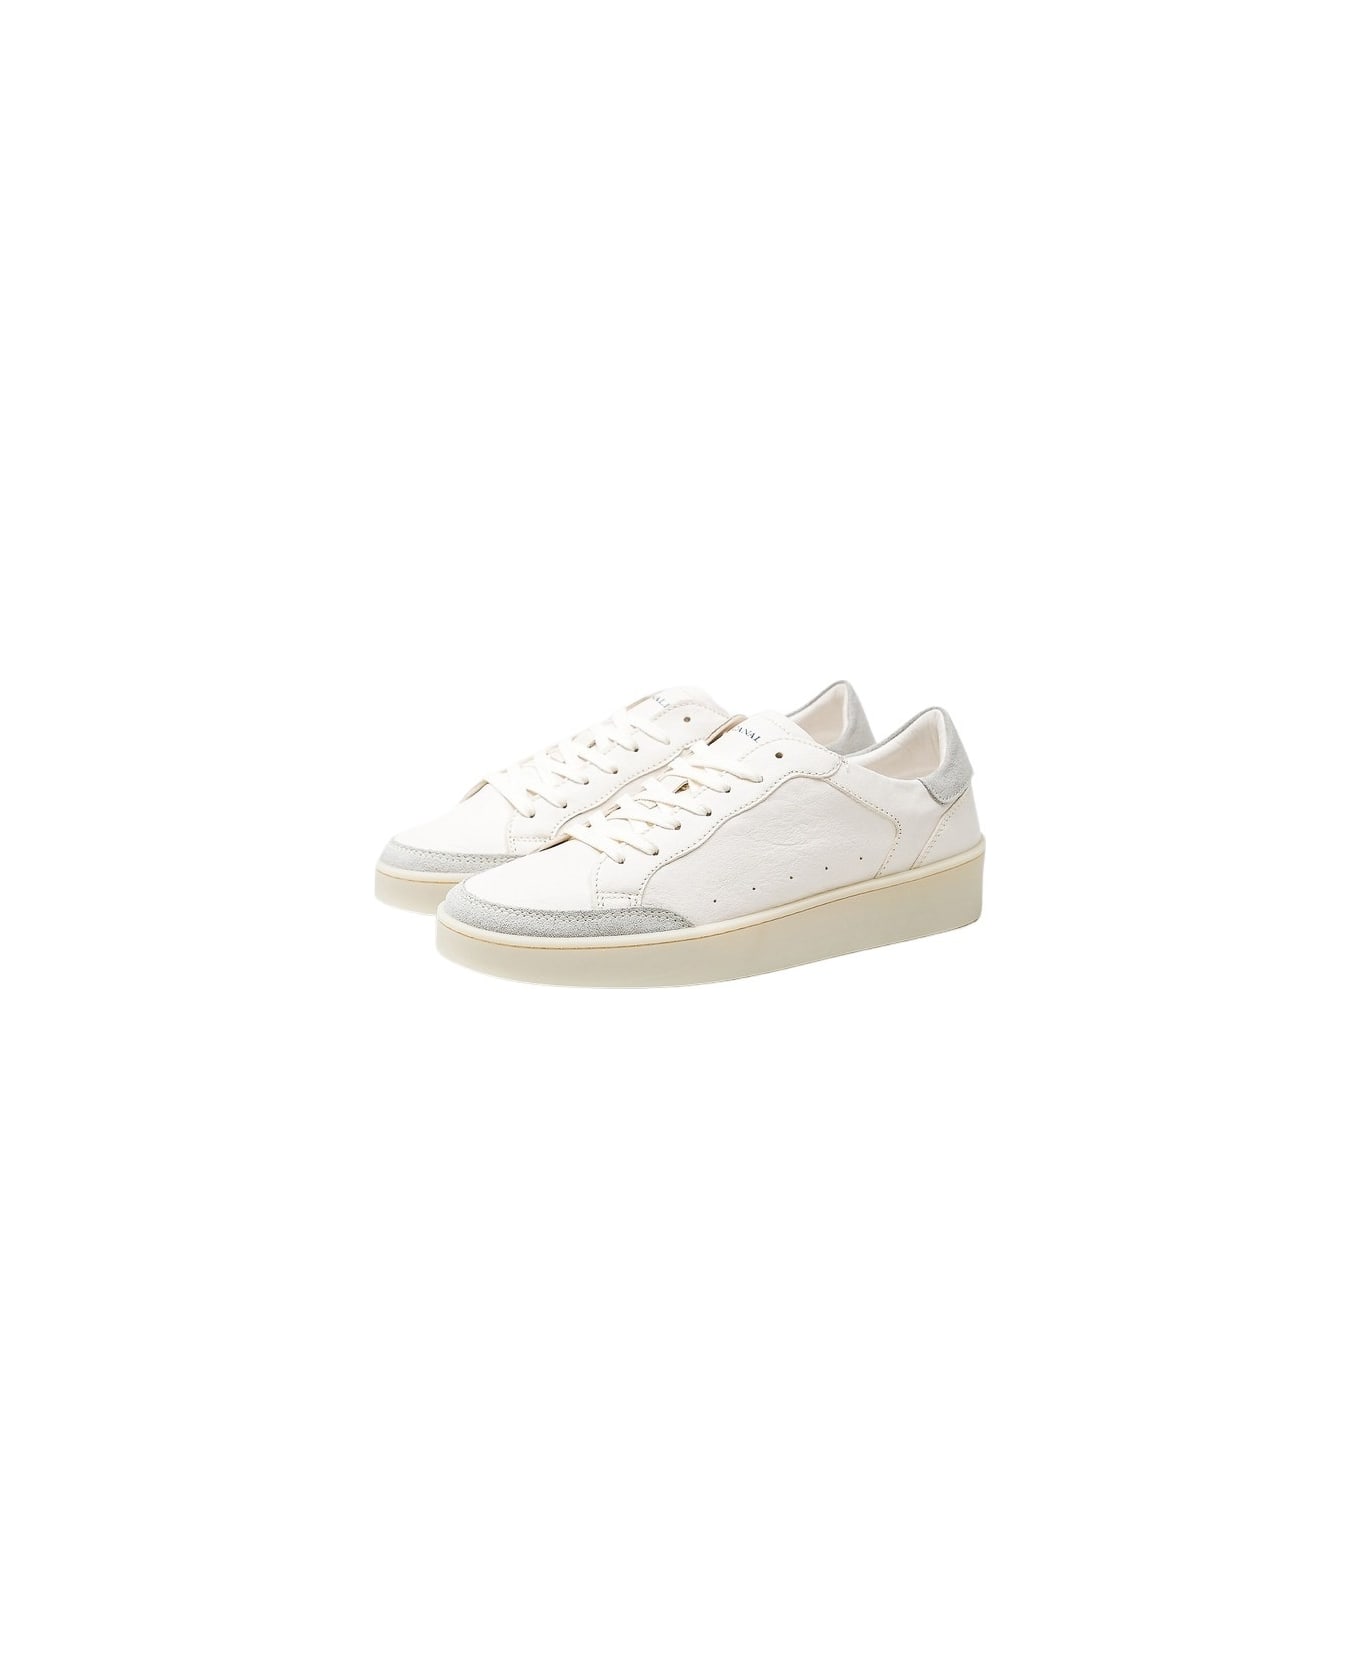 Canali Sneakers - White スニーカー